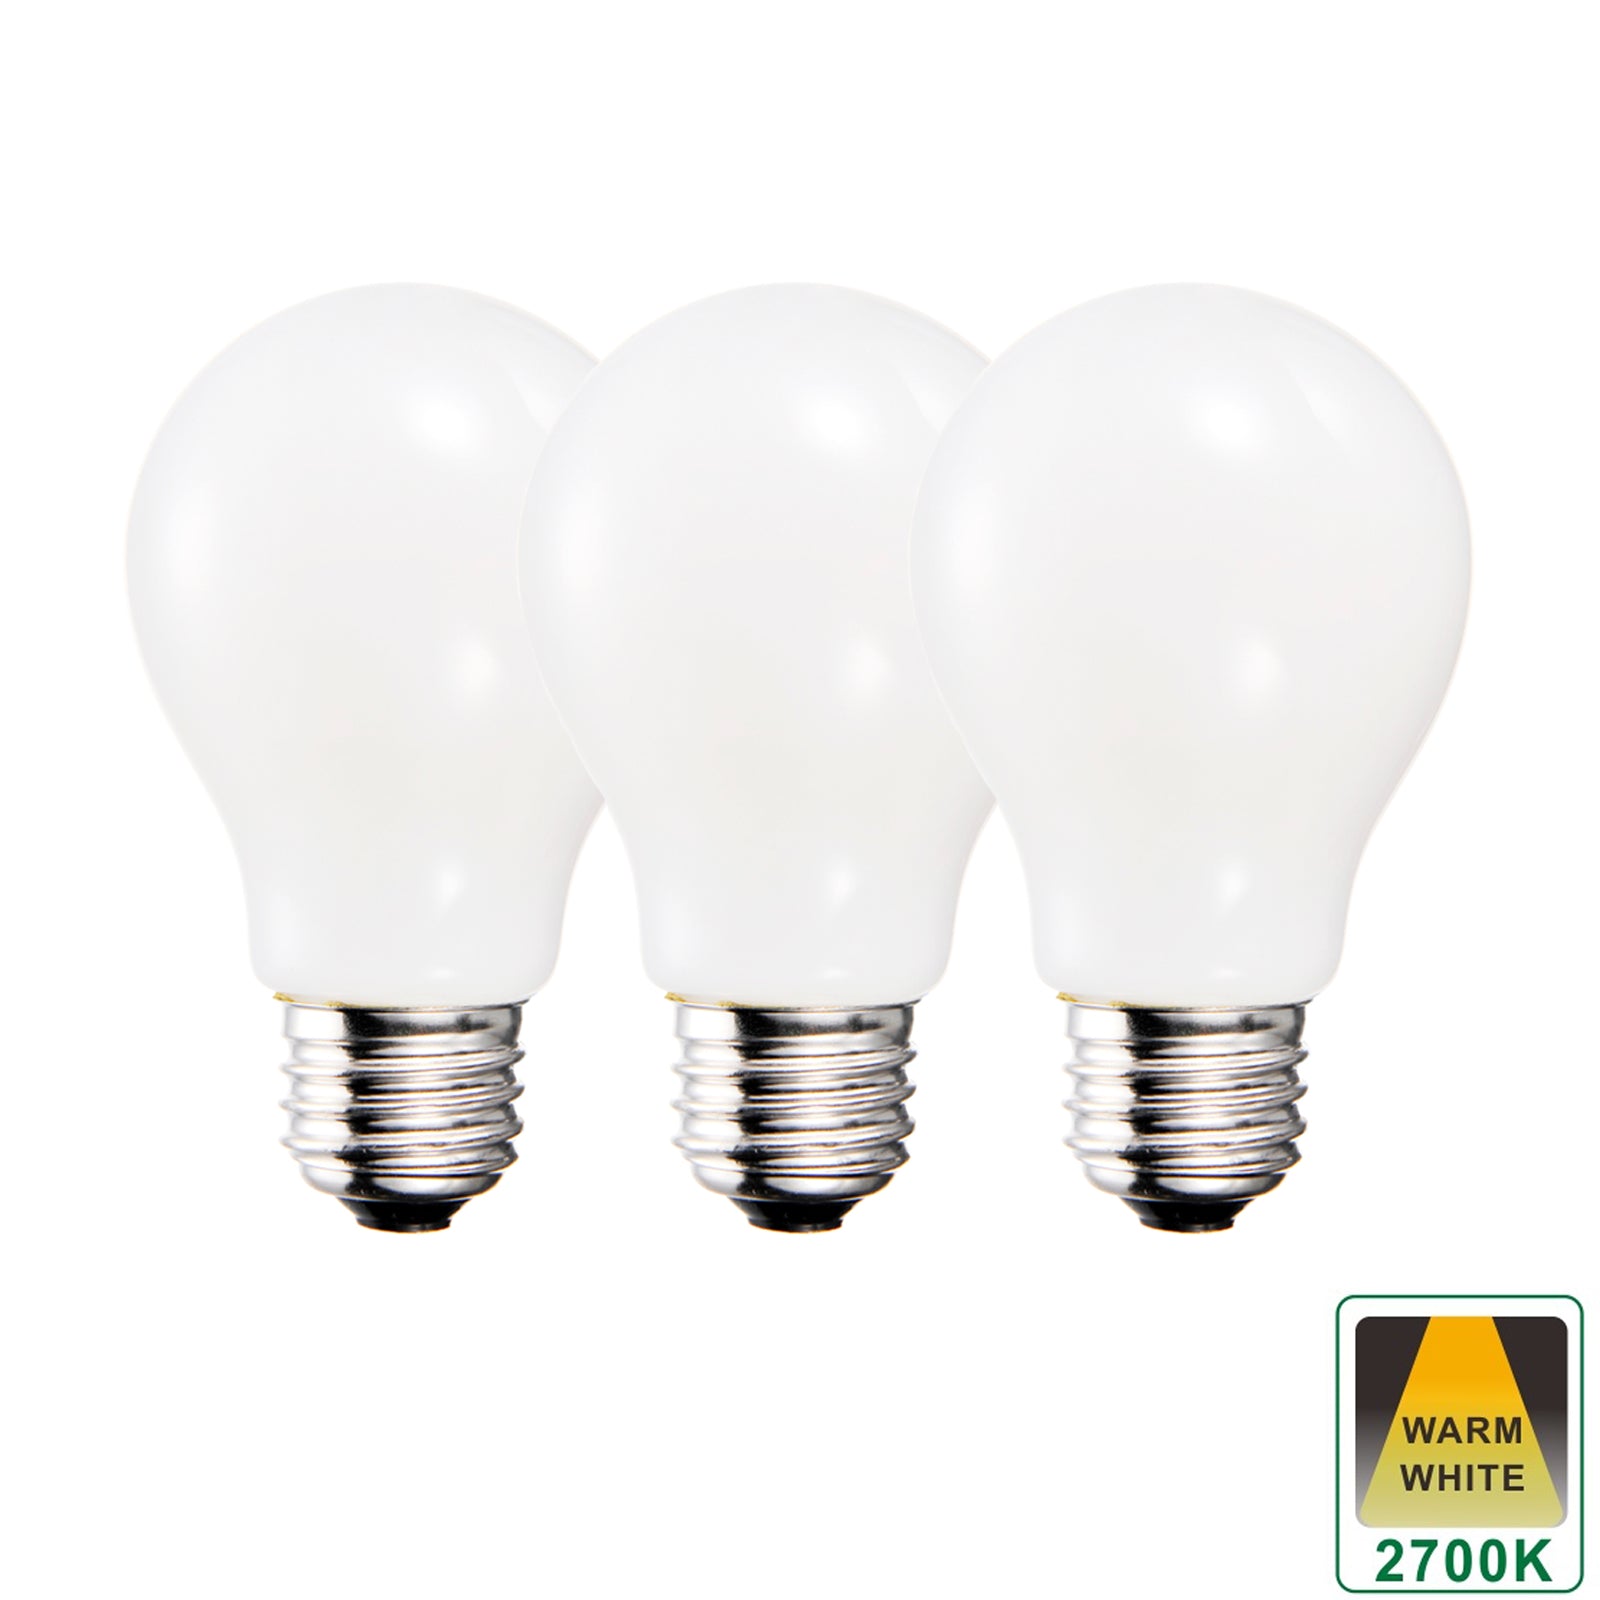 E27 9 Watts Dimmable LED GLS/A60 Standard Light Bulb, Opal Finish Warm White Packs of 3, 5 and 10